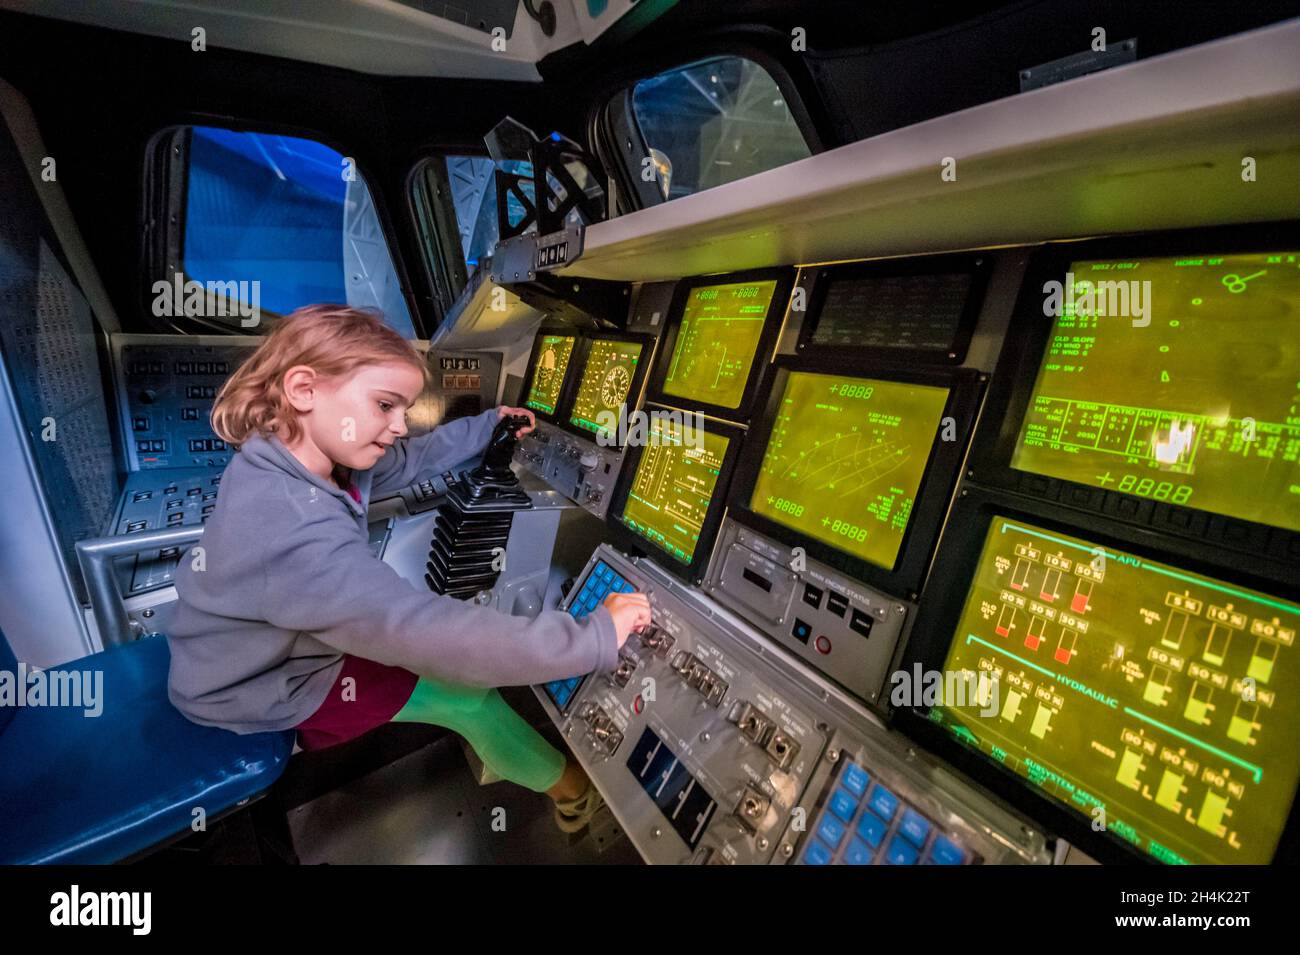 United States, Florida, Orlando, Cape Canaveral, Kennedy Space Center, space museum, child testing the cockpit in the cockpit of a life-size model of the shuttle Atlantis Stock Photo